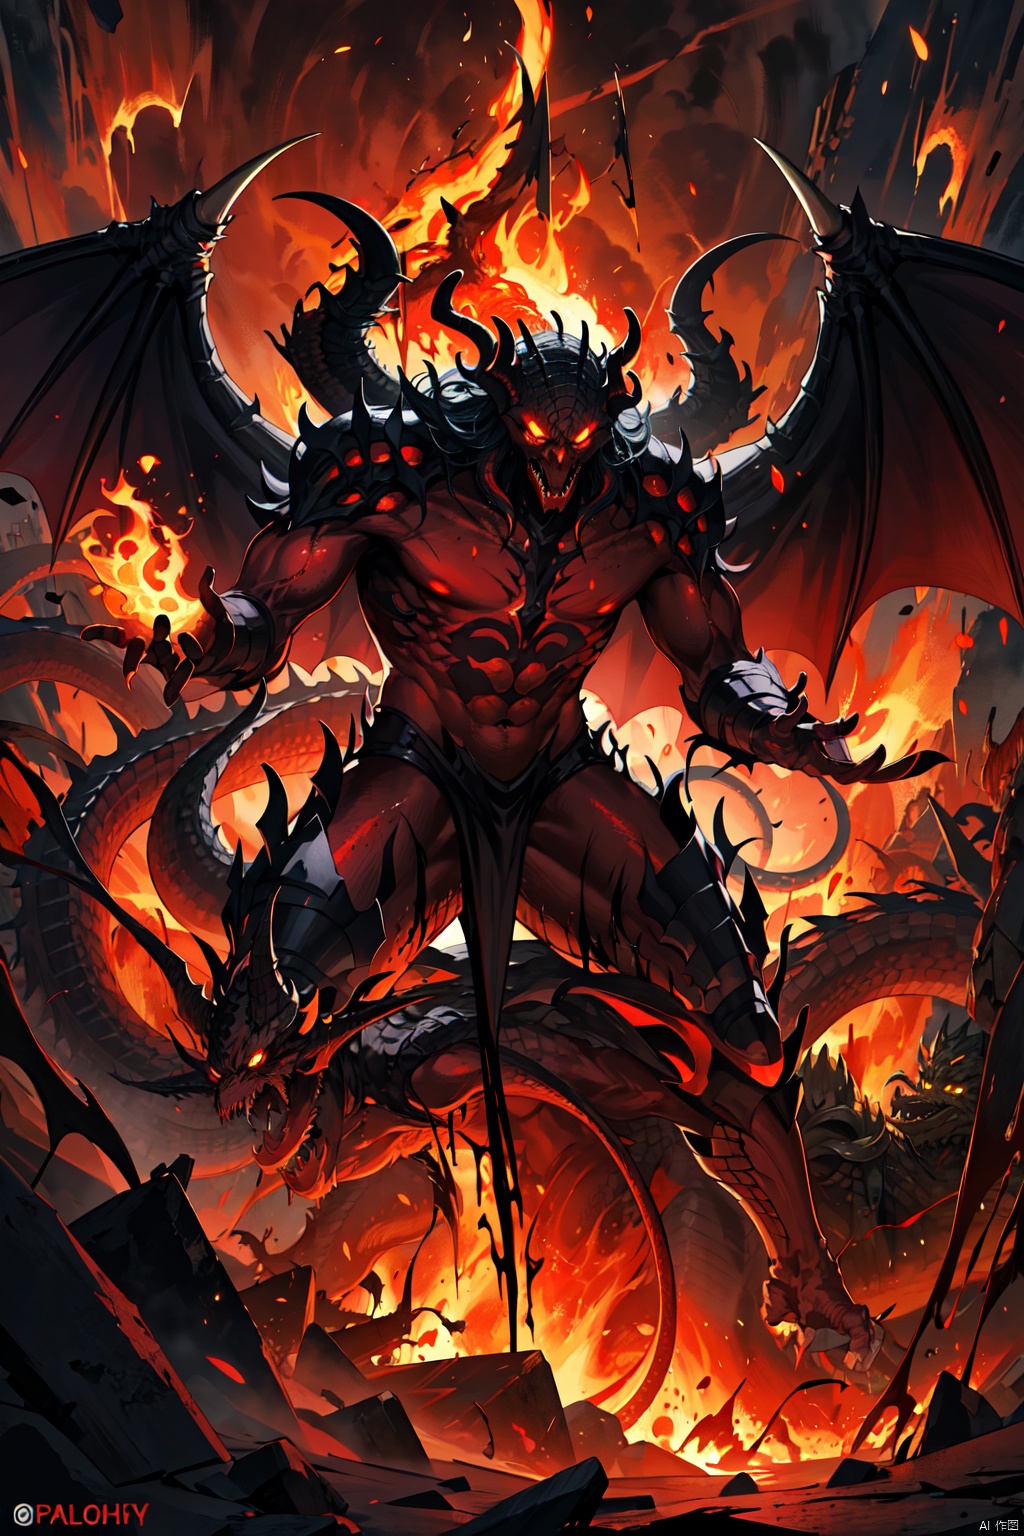 hell,dragons,demon,red_sky,molten rock,flame, Cthulhu